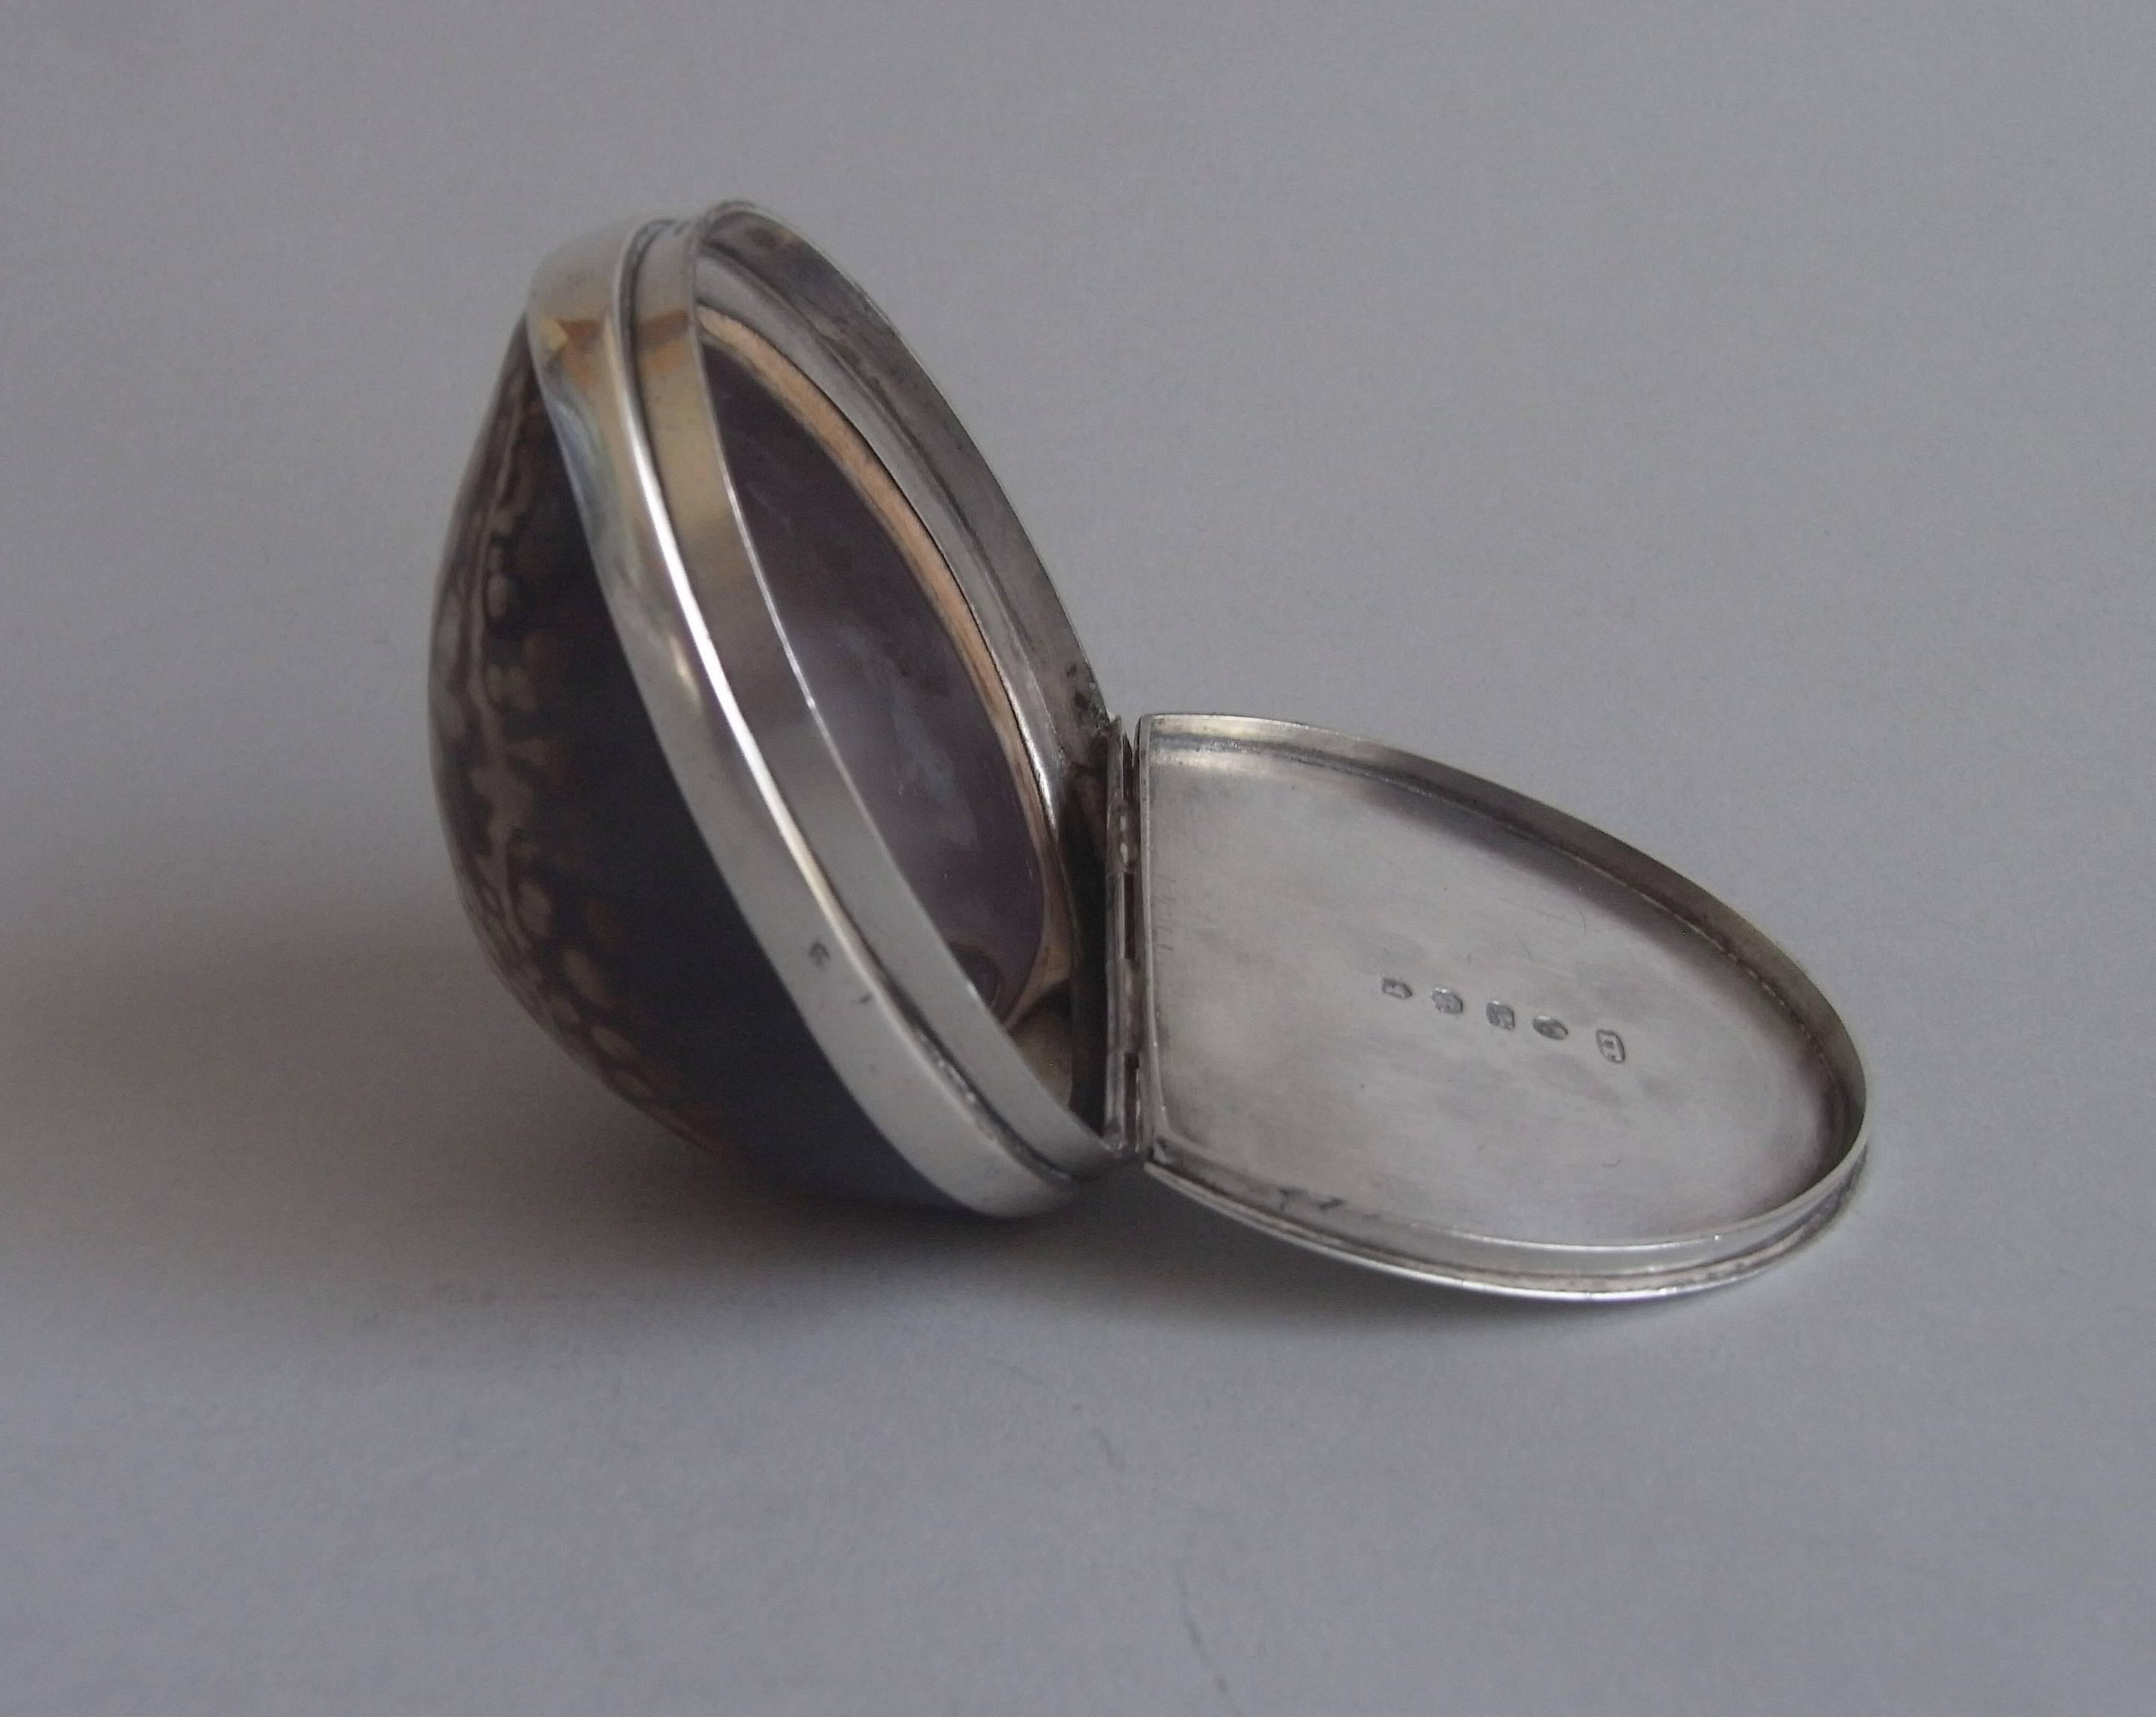 19th Century A rare George III silver mounted Cowrie Shell Snuff Box made in Birmingham in 18